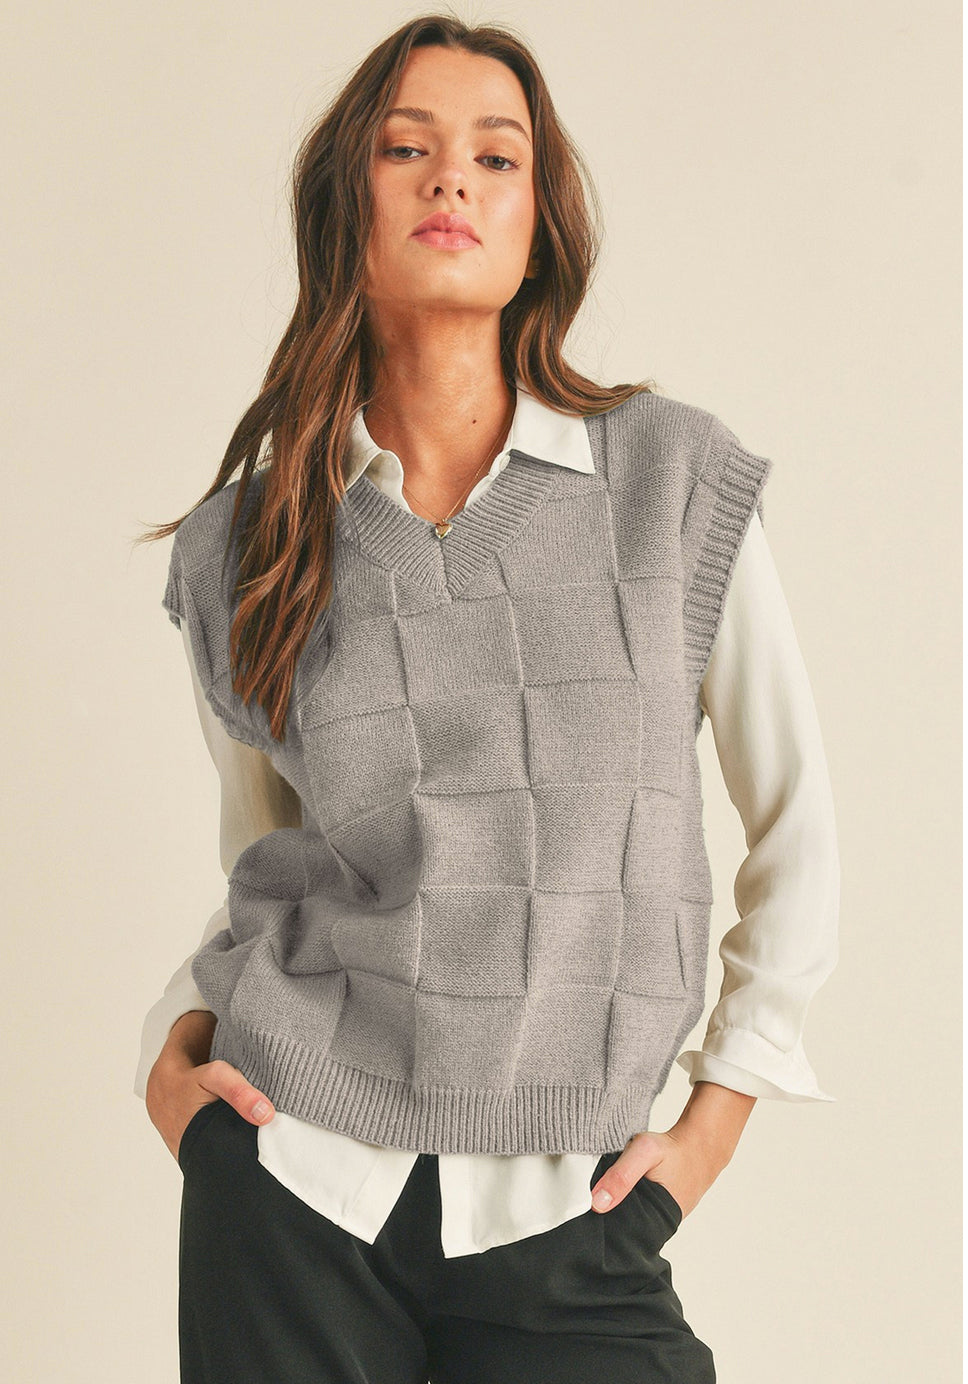 Jade Creek Boutique Blush Taupe Checkered Sweater Vest Small